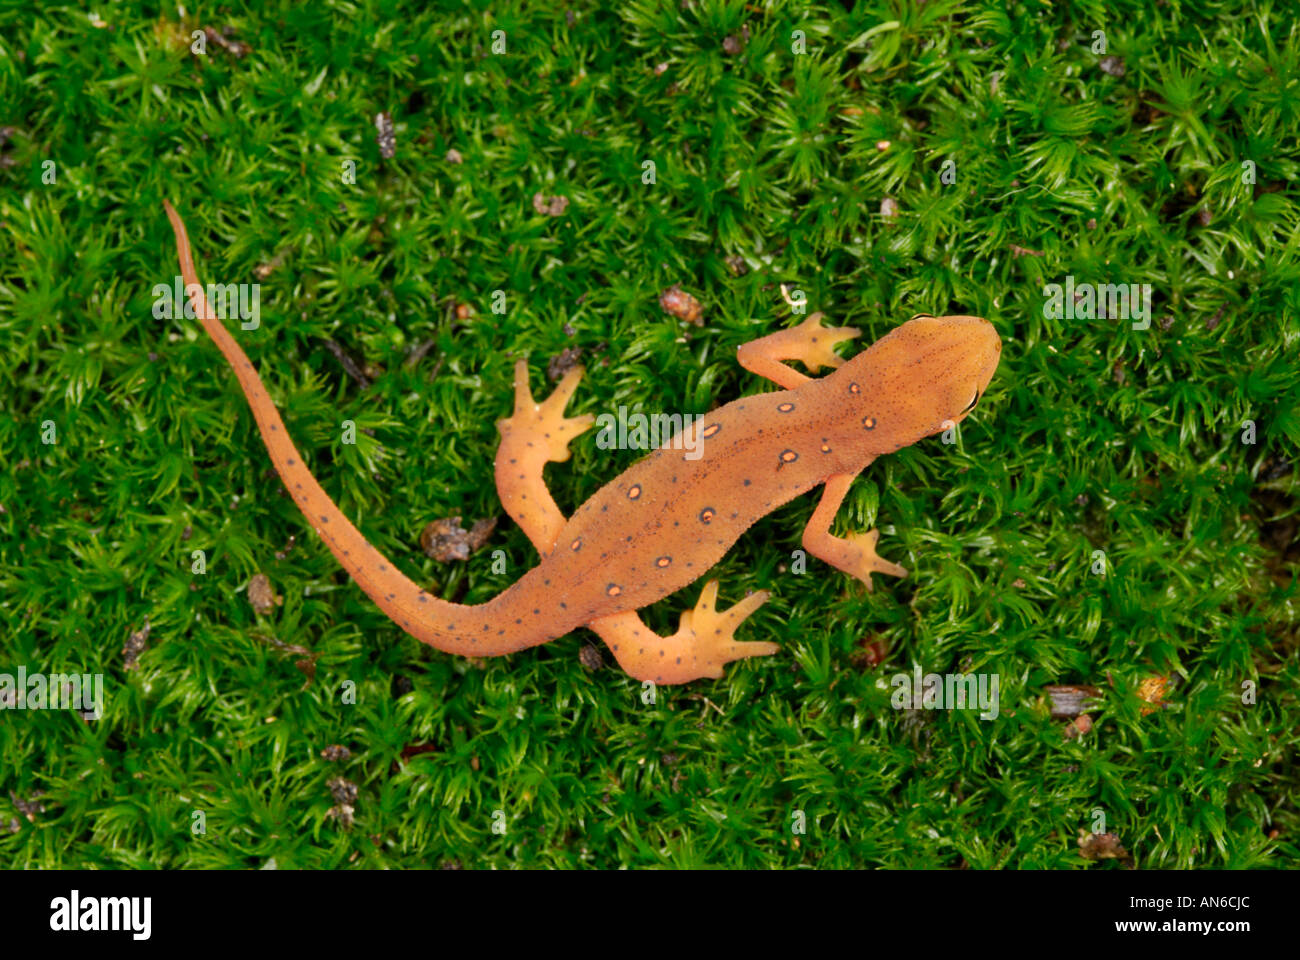 Eastern (or "red-spotted") newt Notophthalmus viridescens juvenile in red eft stage Stock Photo